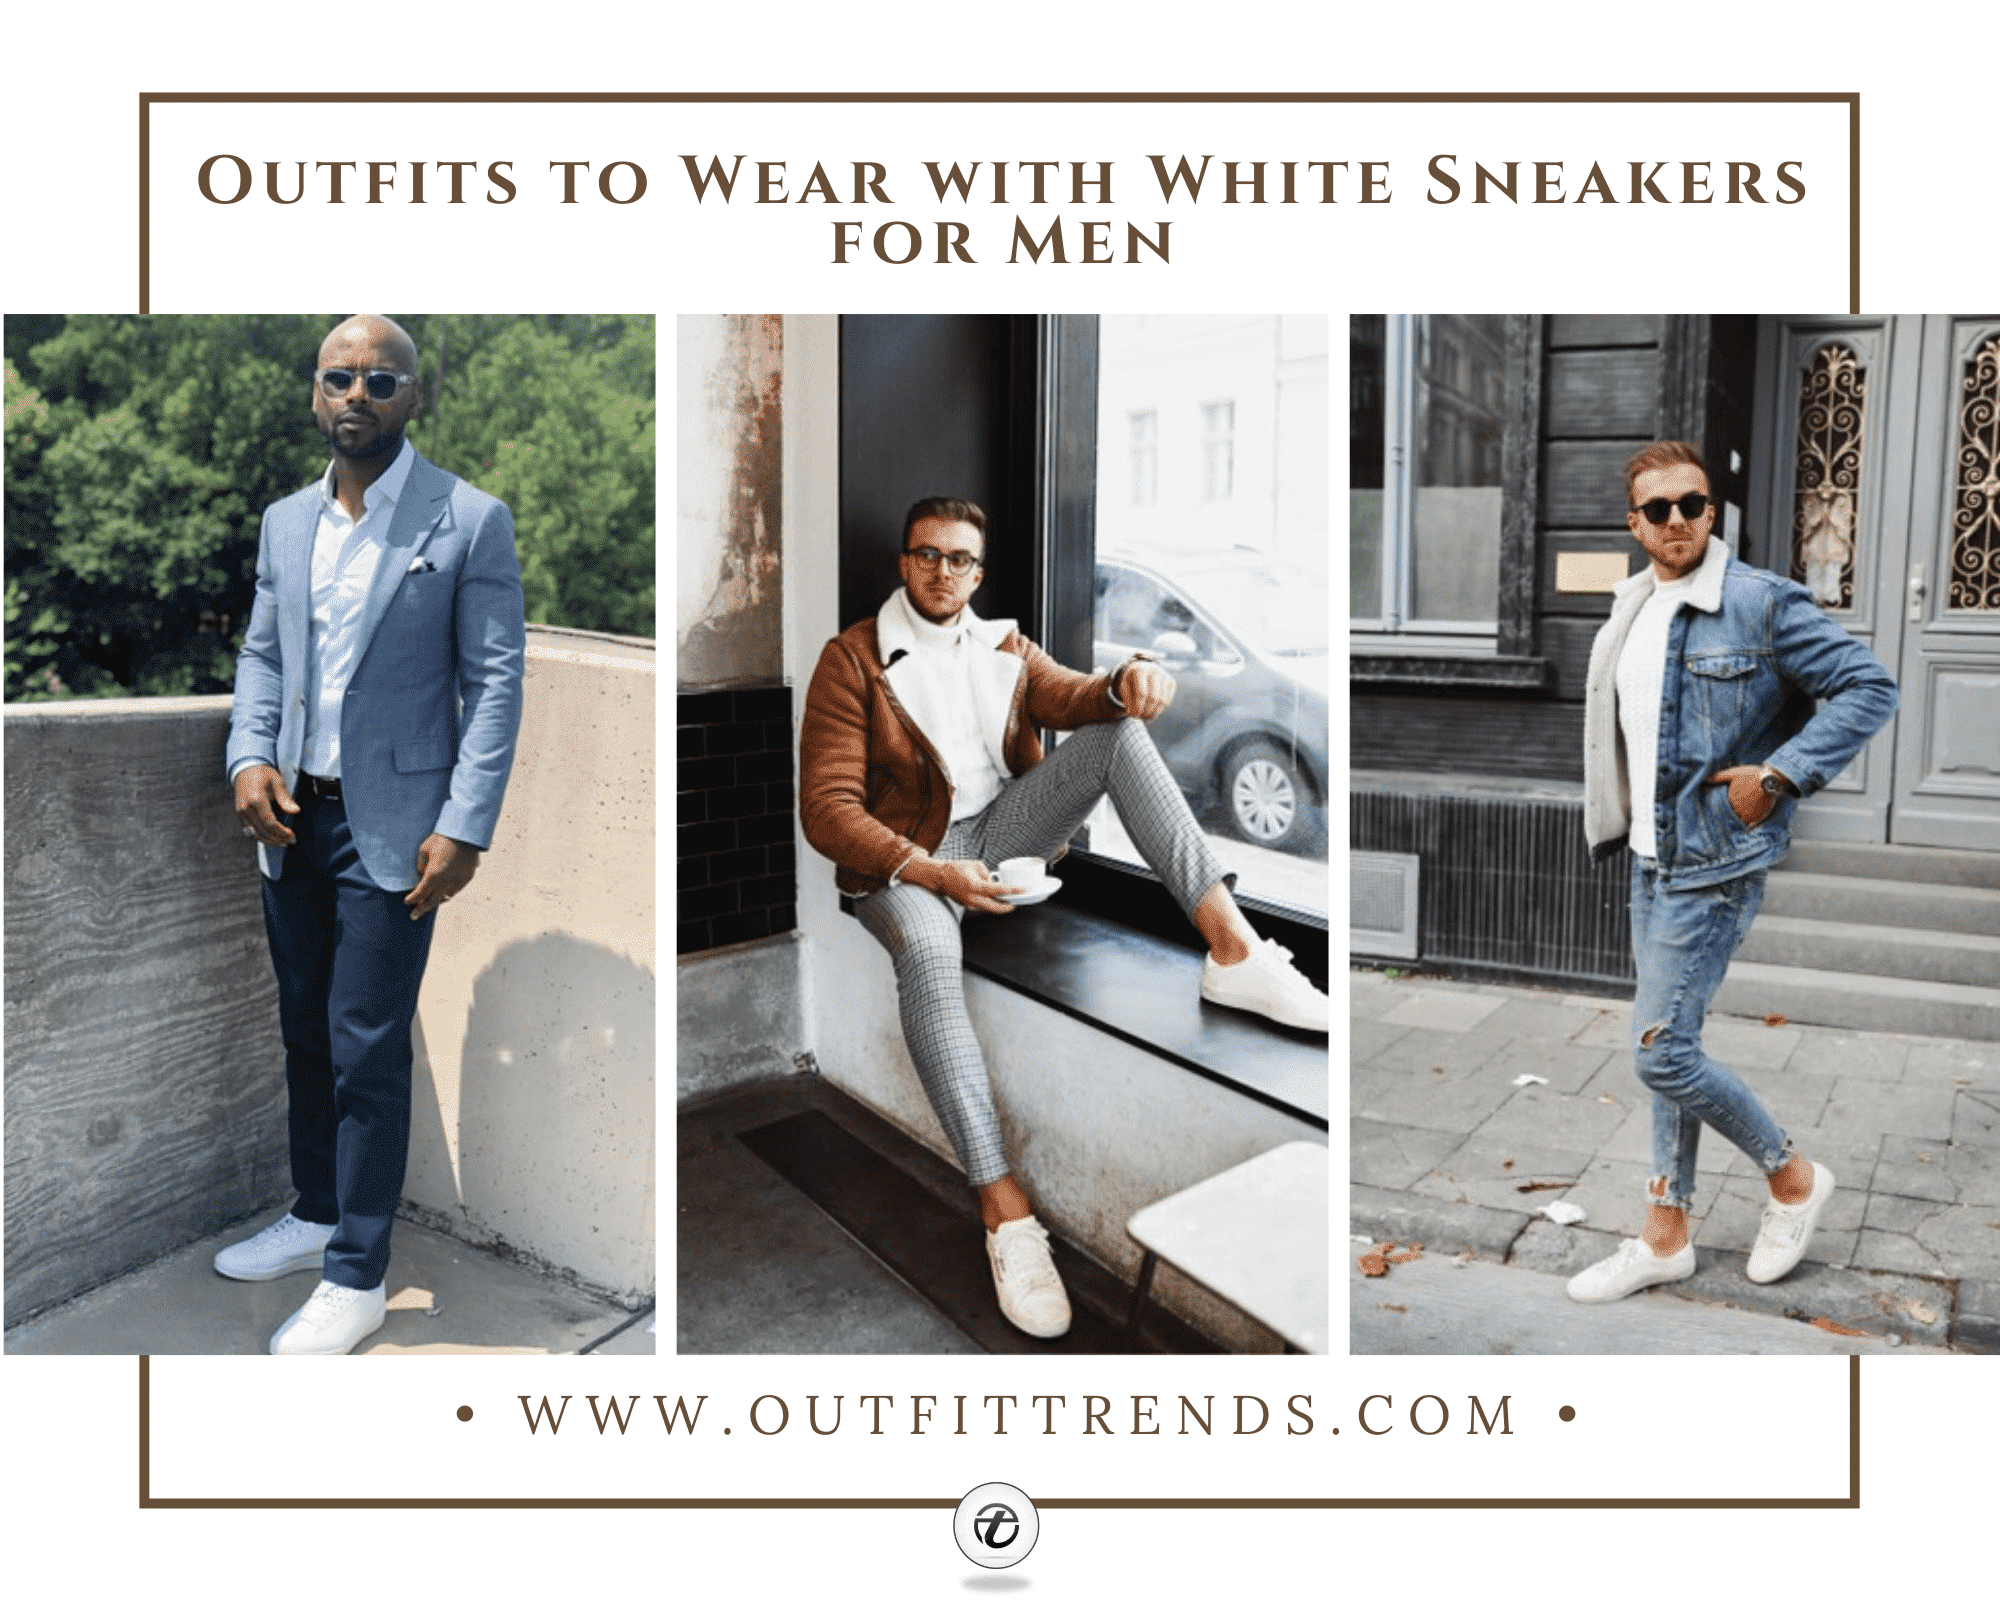 The 13 Best Men's White Sneakers for Punctuating Any Outfit - The Manual